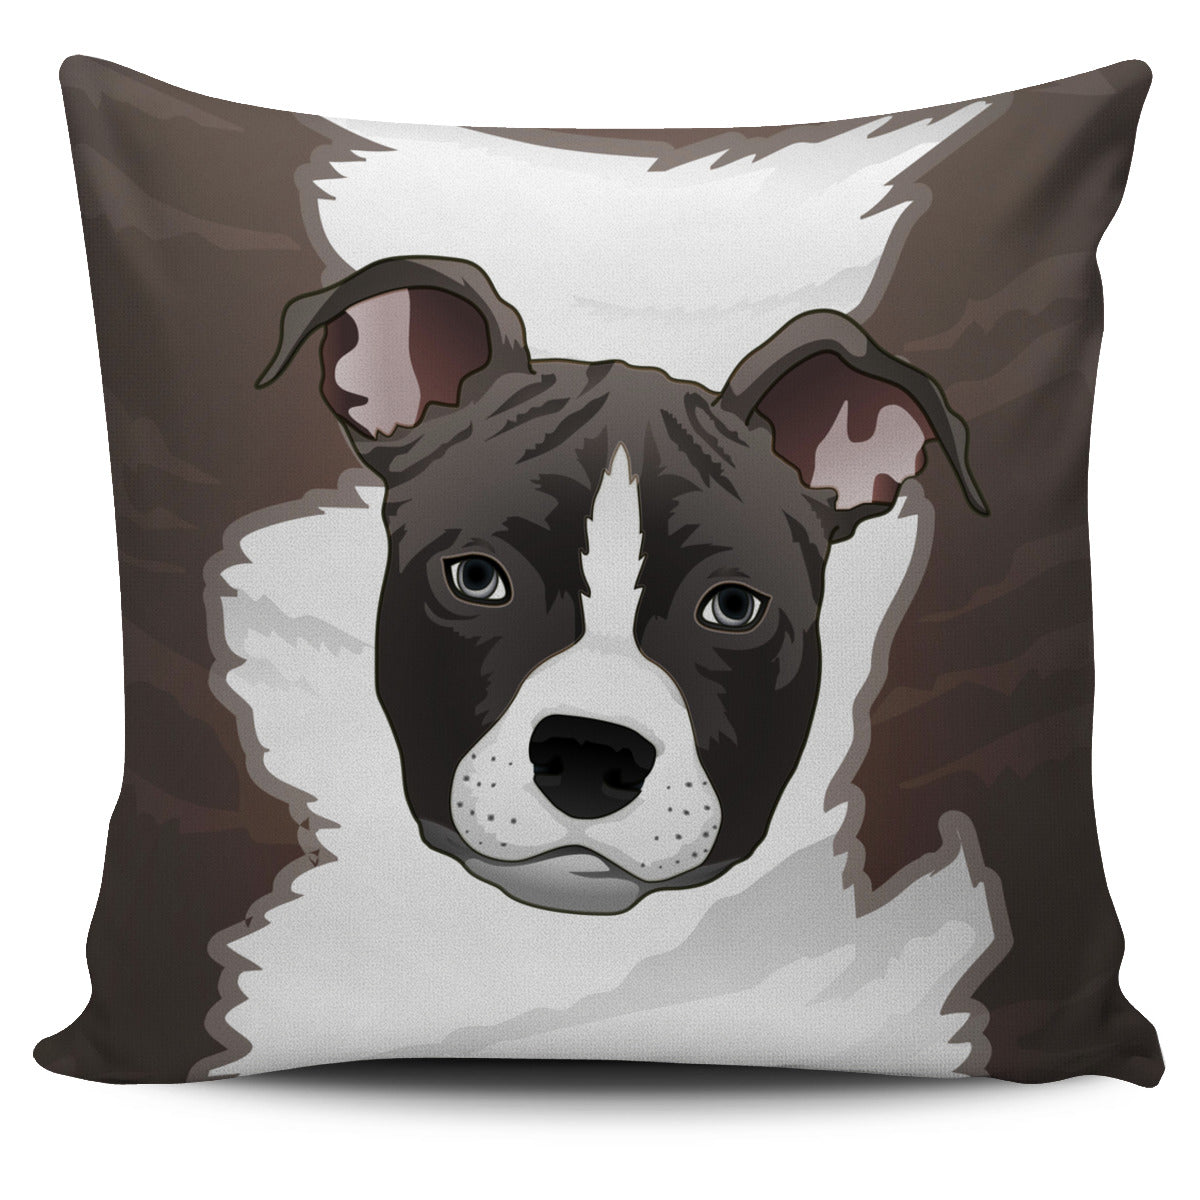 Real Pit Bull Pillow Cover